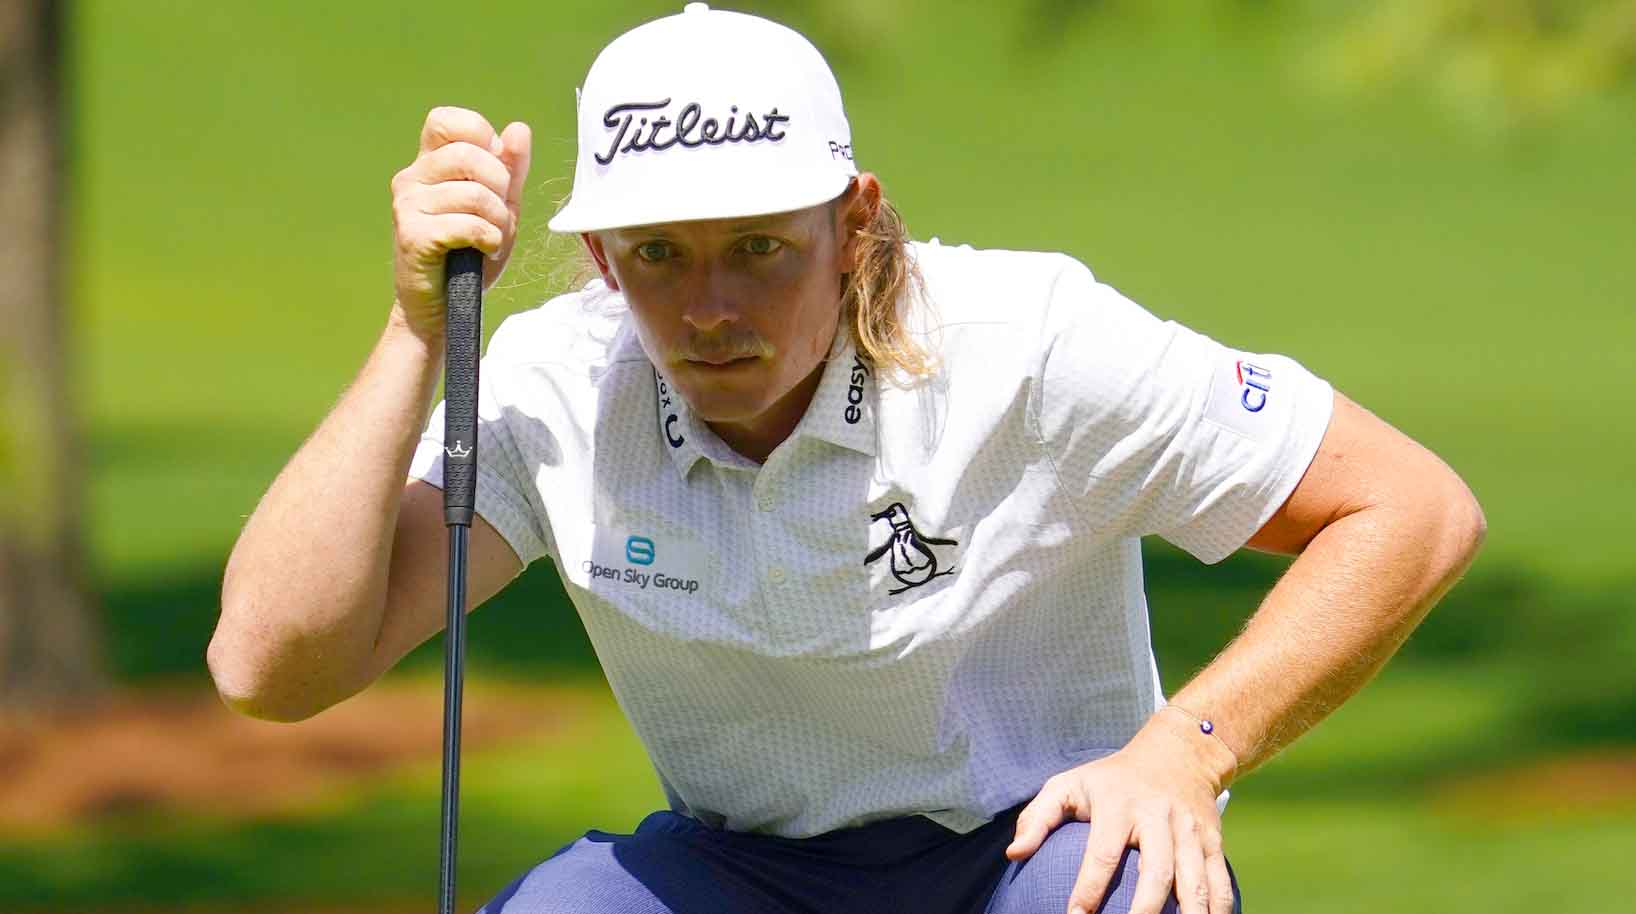 Cameron Smith and his mullet in contention again at Masters